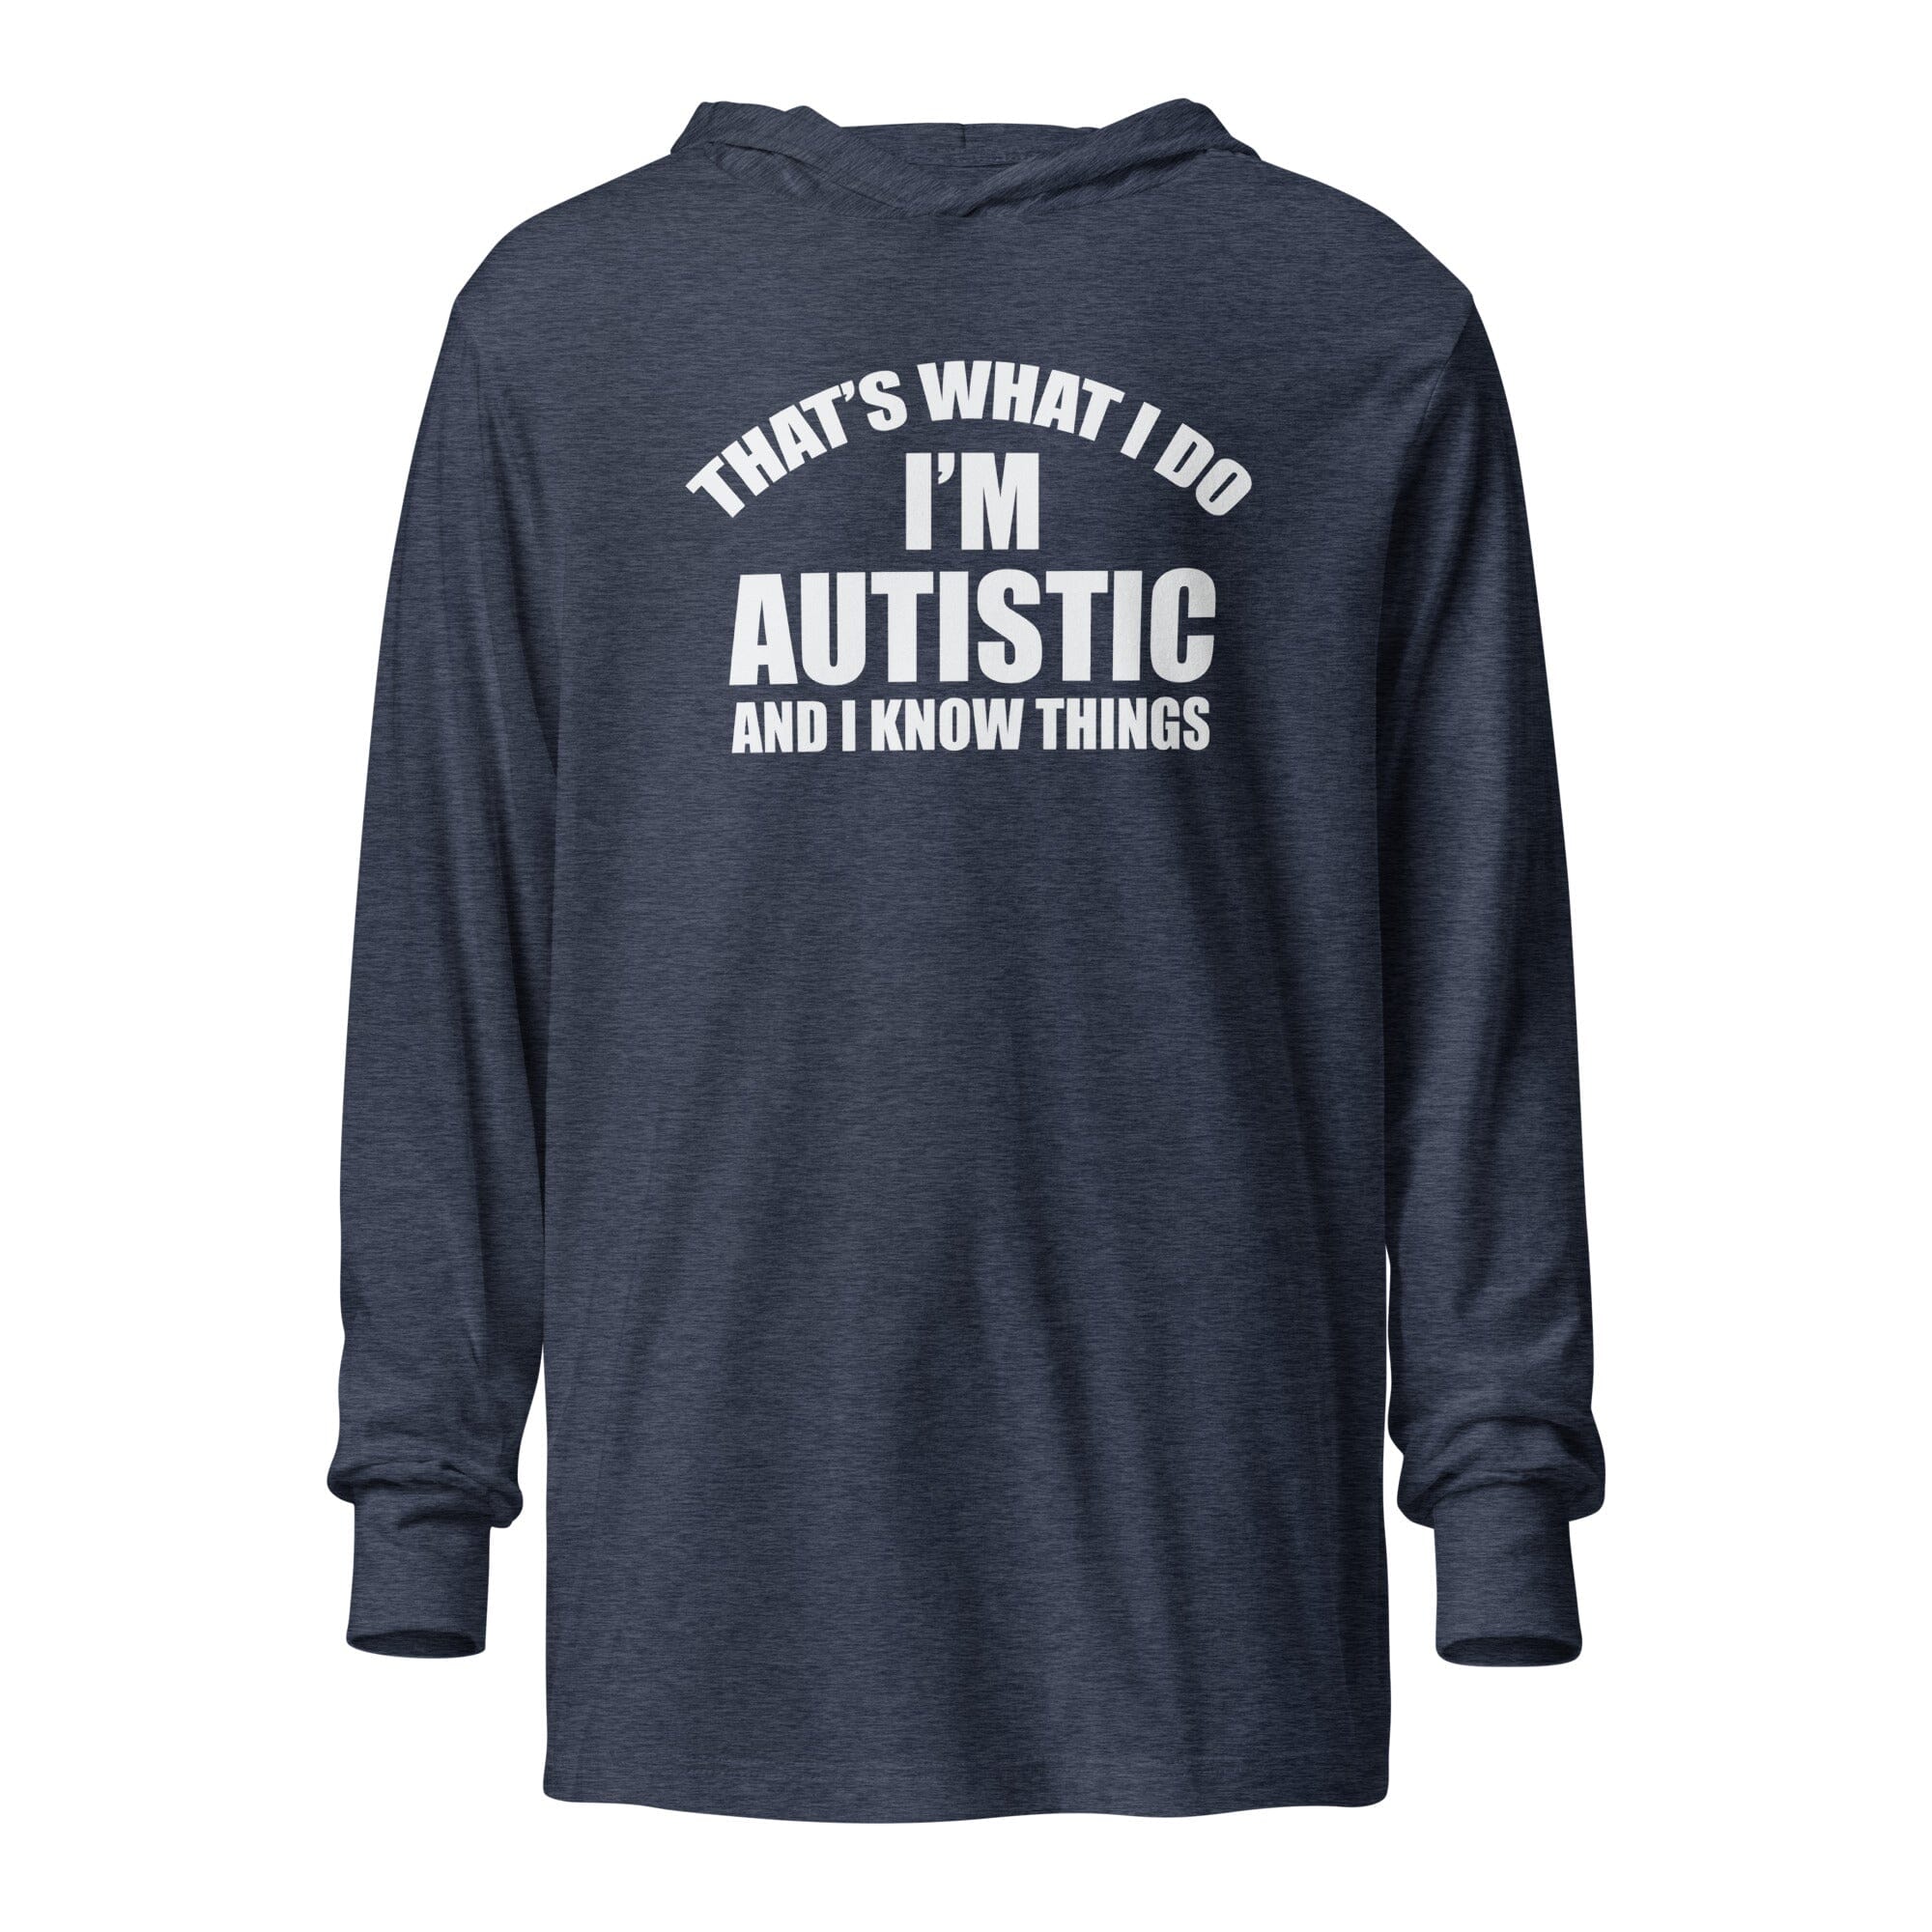 That's What I Do, I'm Autistic and I Know Things Unisex Hooded long-sleeve tee The Autistic Innovator Heather Navy XS 